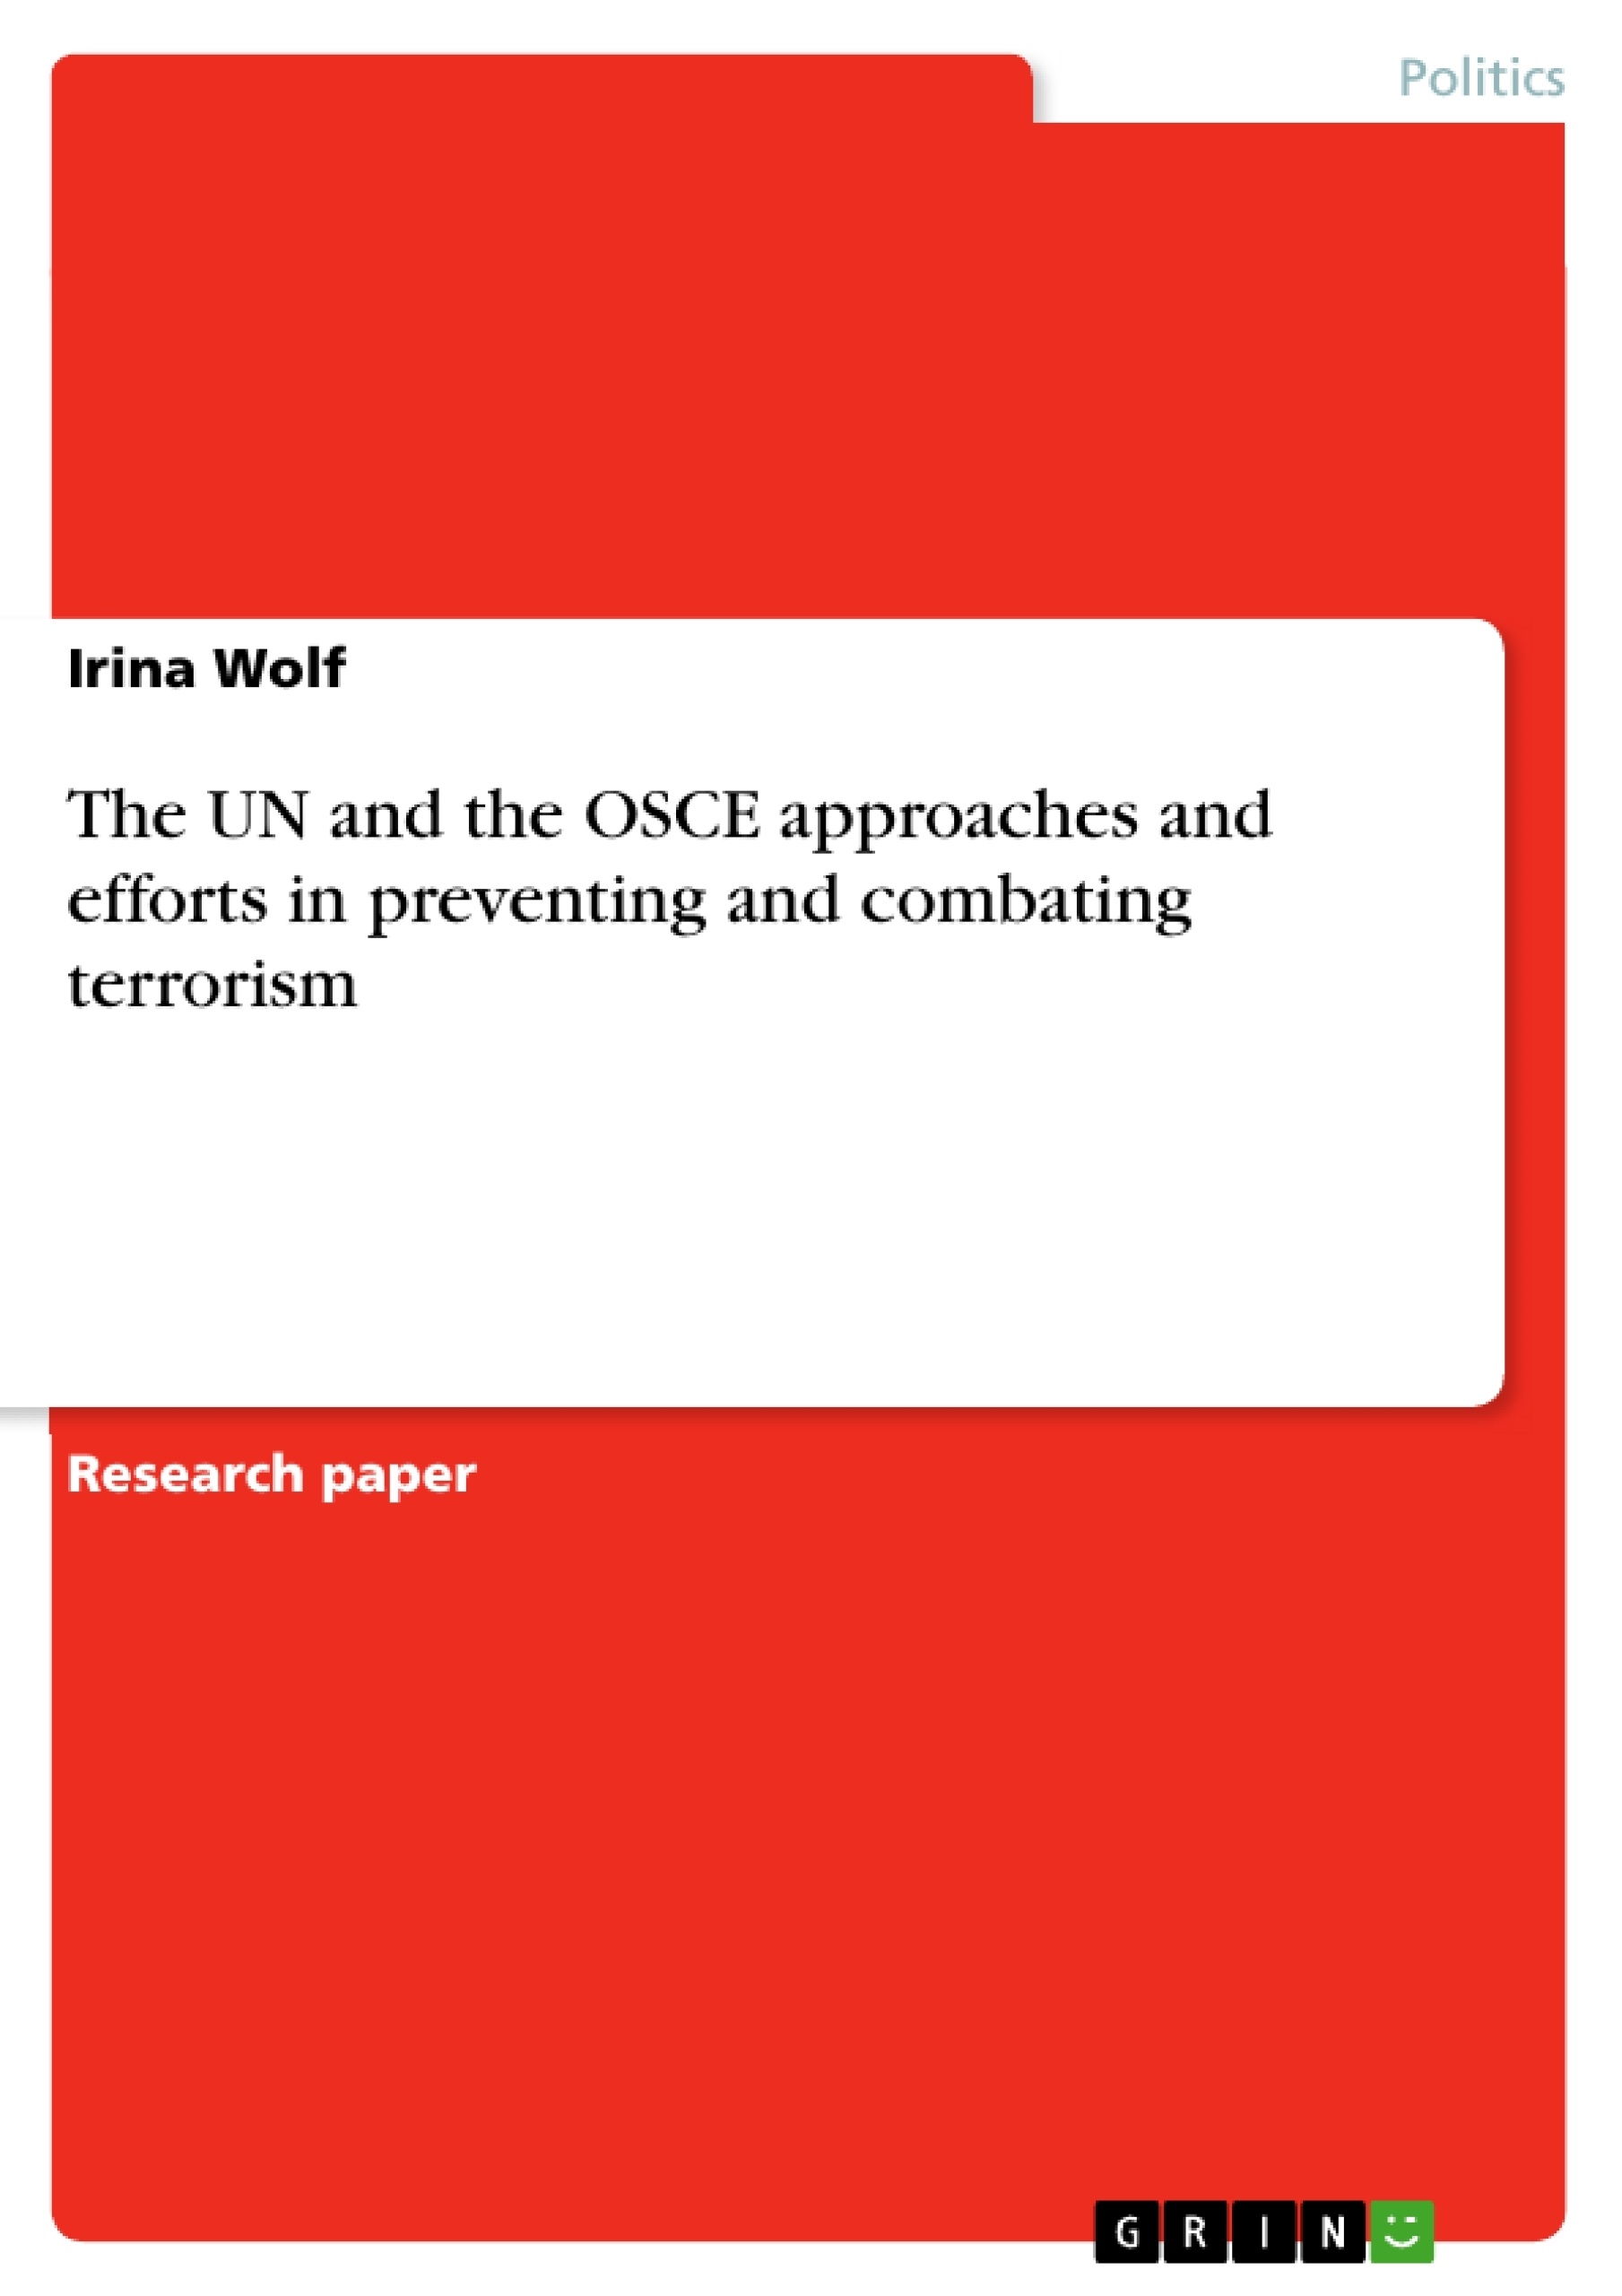 Title: The UN and the OSCE approaches and efforts in preventing and combating terrorism